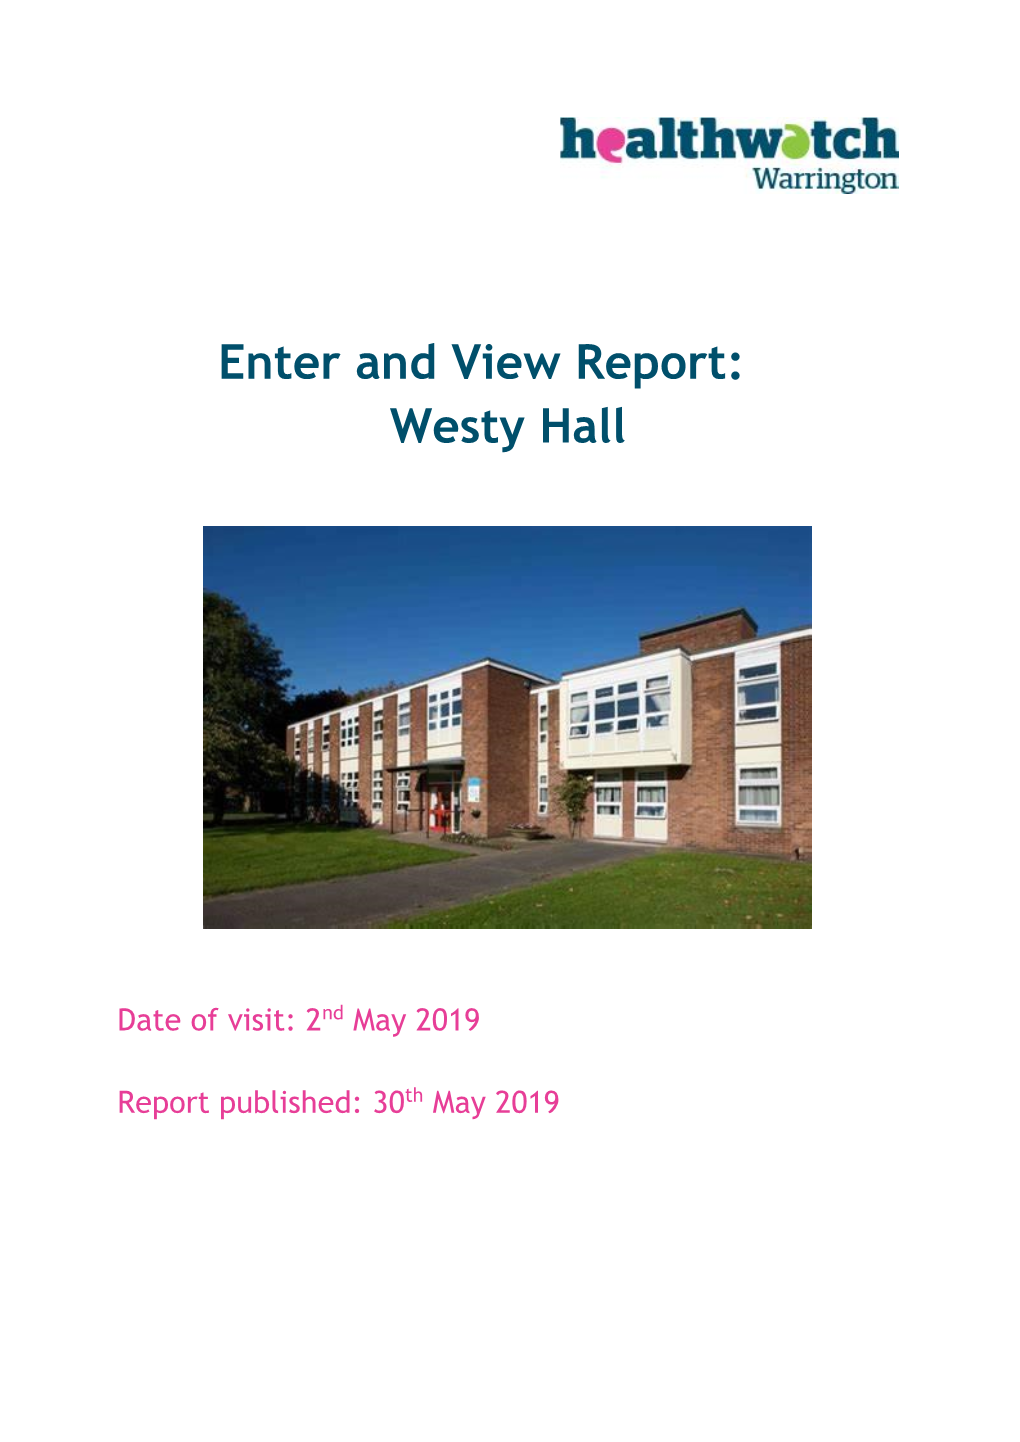 Enter and View Report: Westy Hall